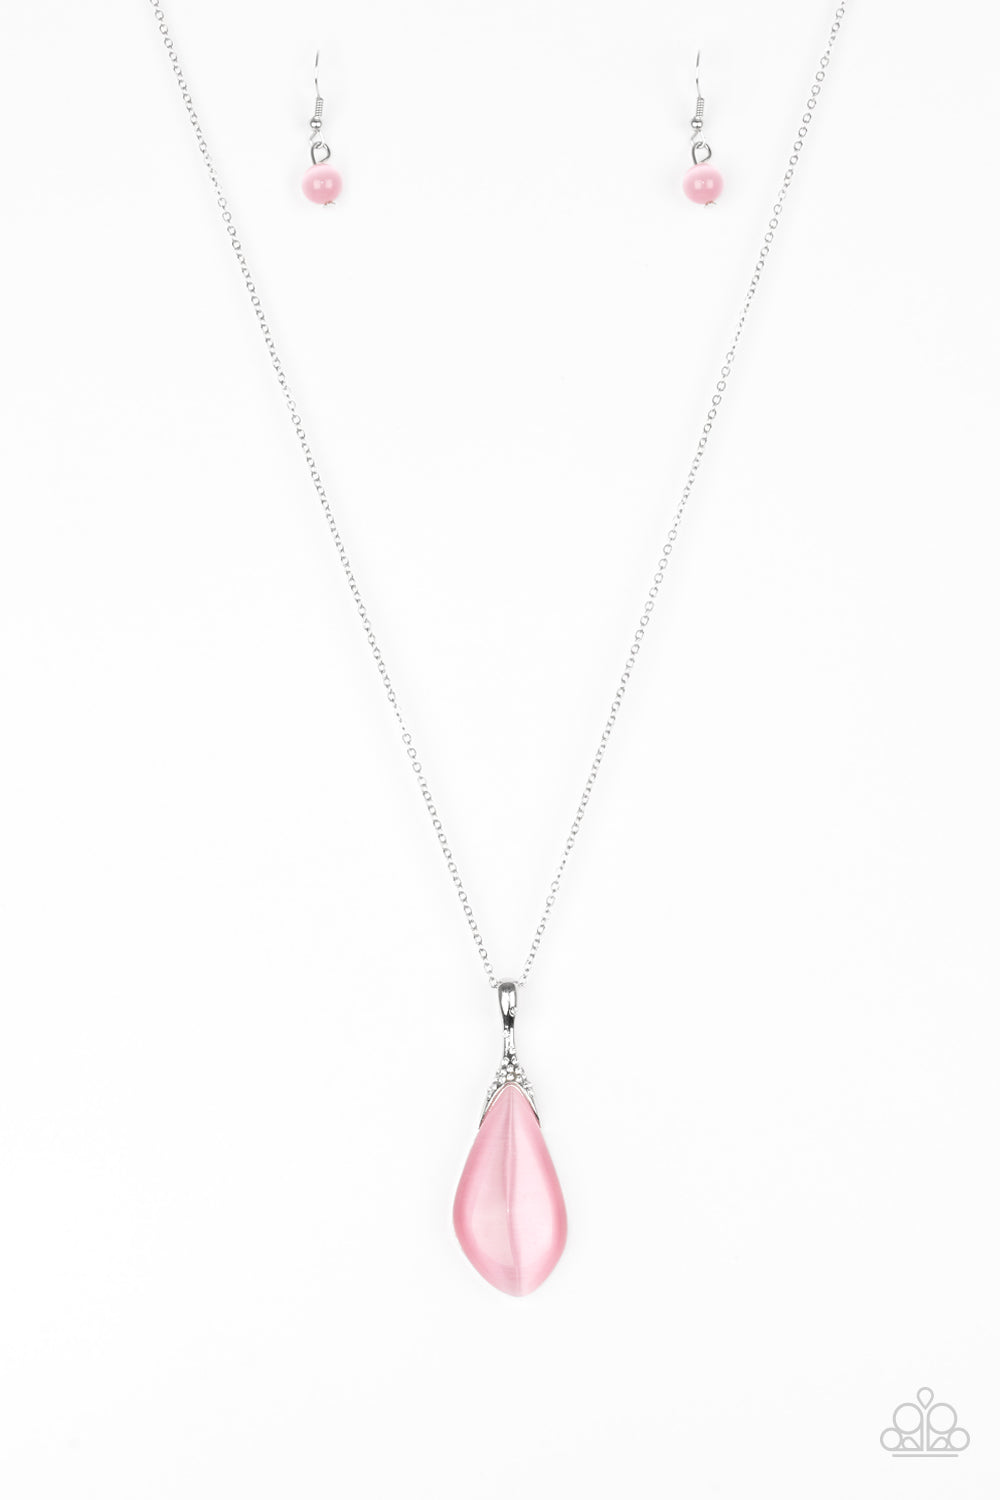 Friends In GLOW Places - Pink necklace 508